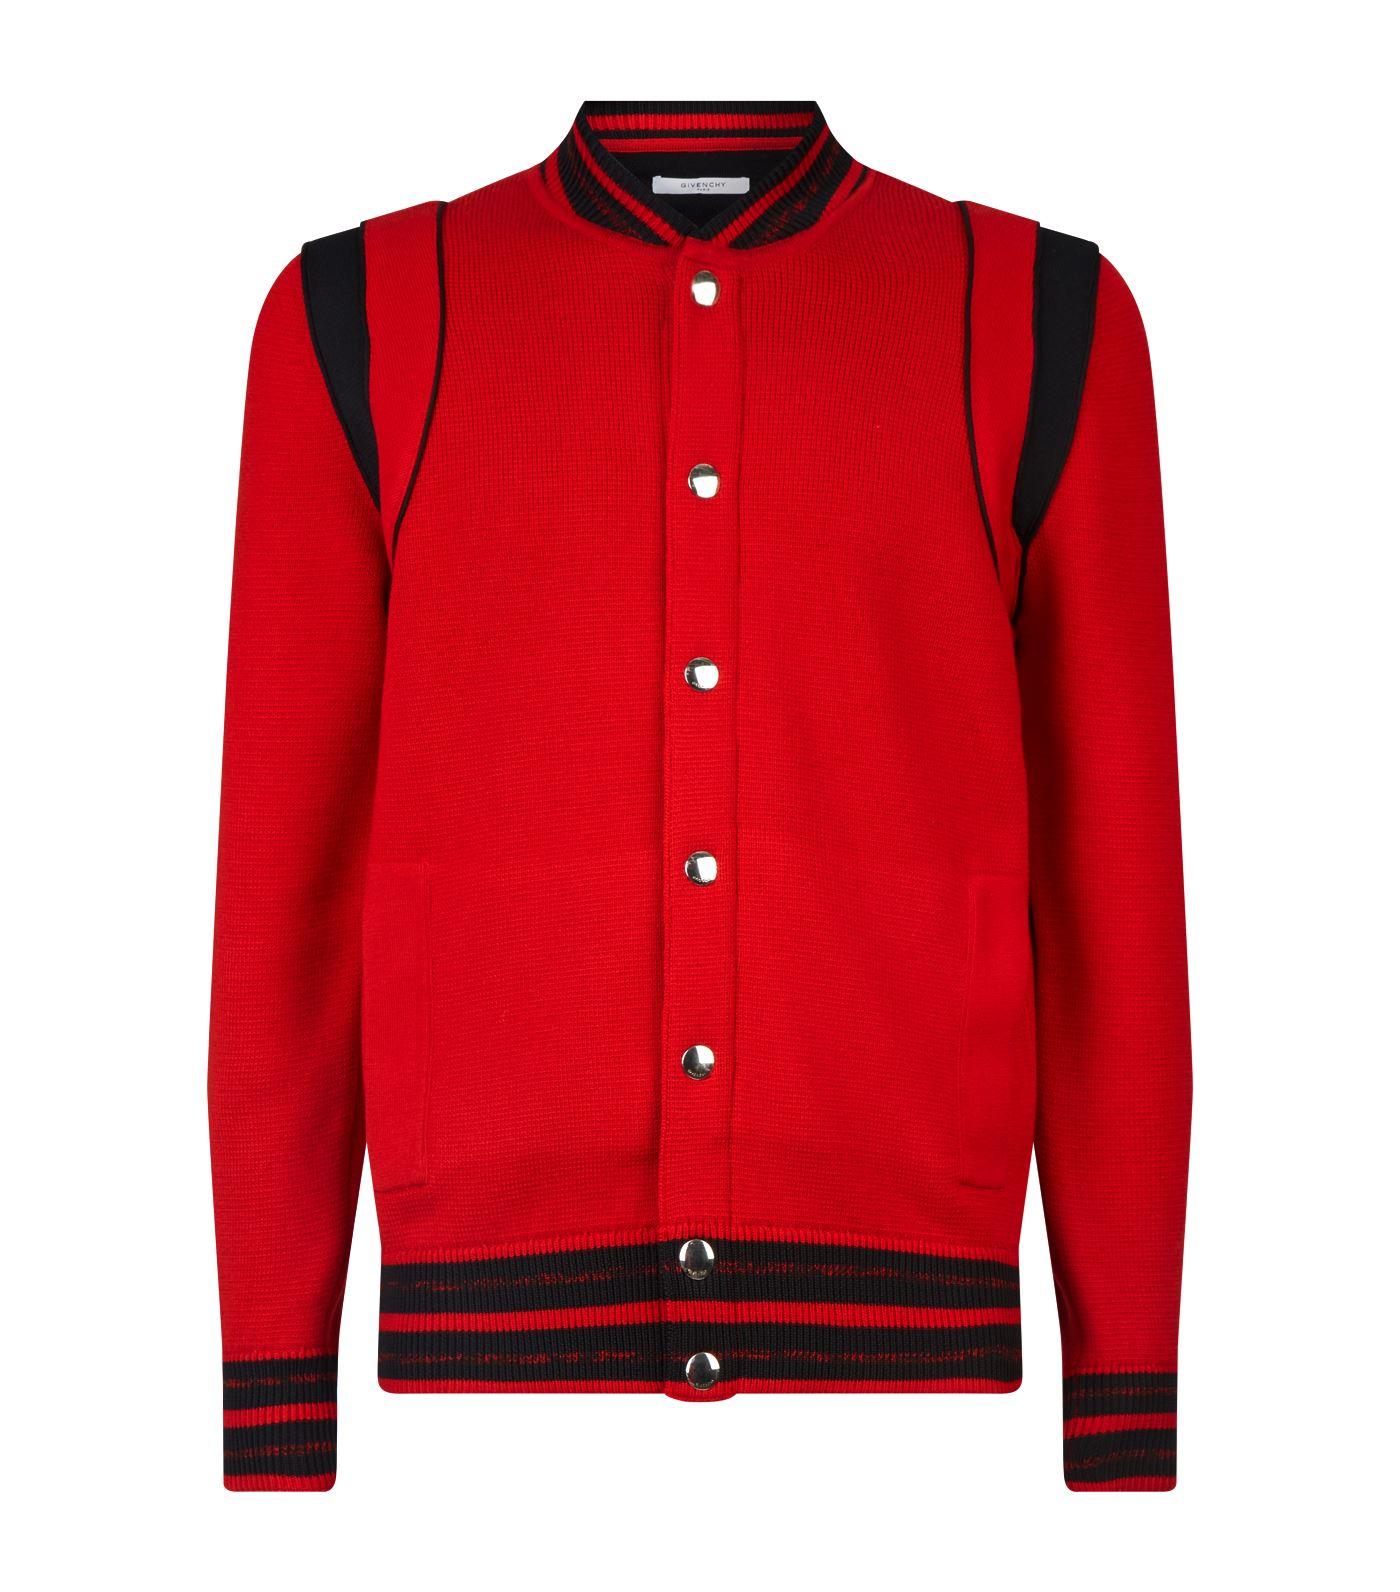 Givenchy Knitted Bomber Jacket in Red for Men - Save 24% - Lyst